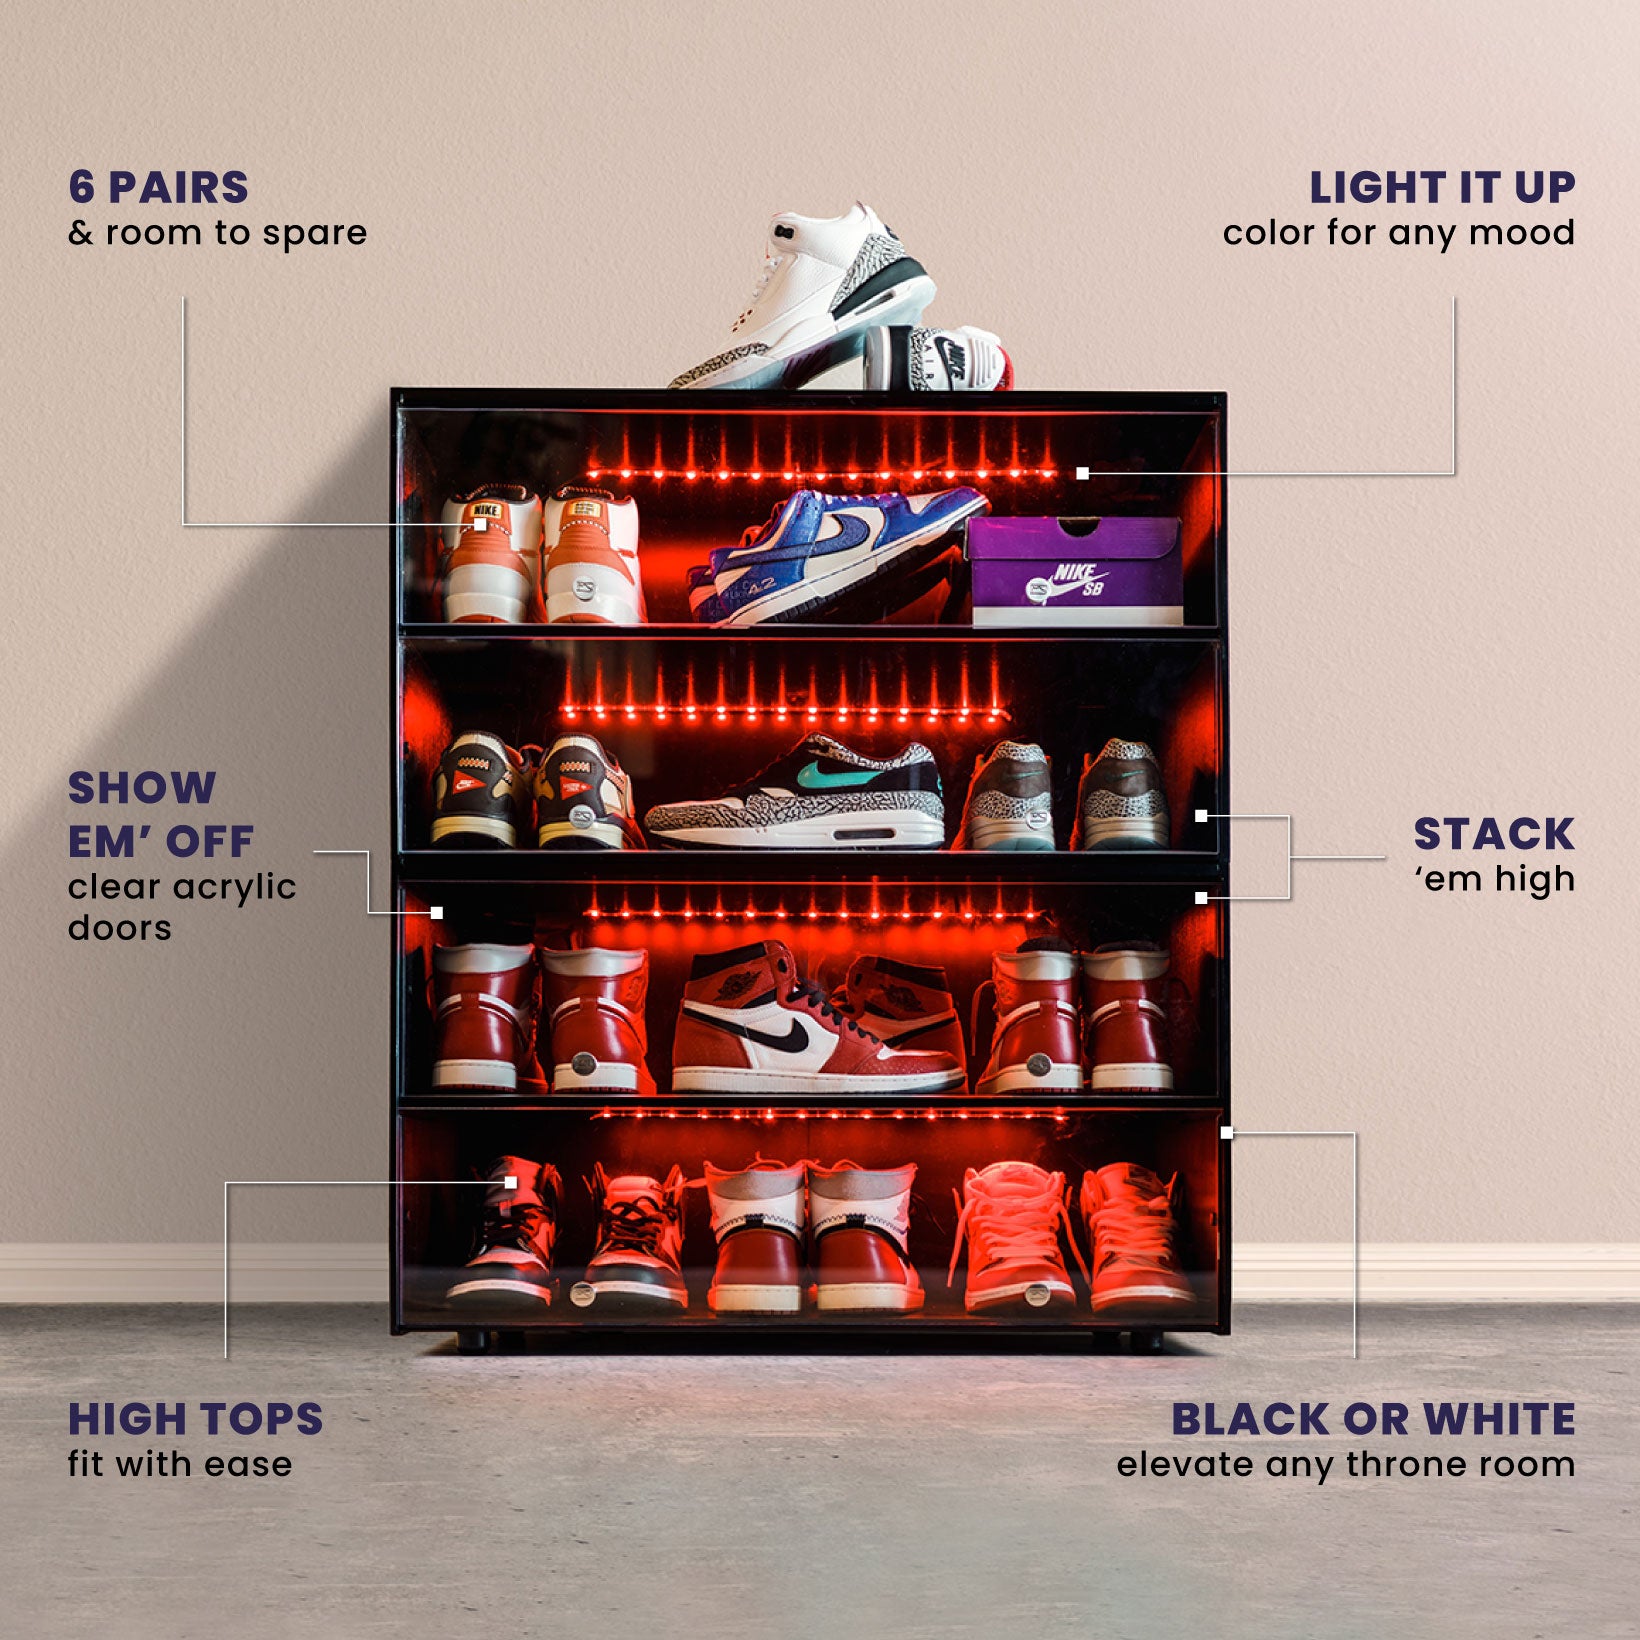 Sneaker Storage: Organize Your Shoe Collection with Premium Solutions –  SNEAKER THRONE